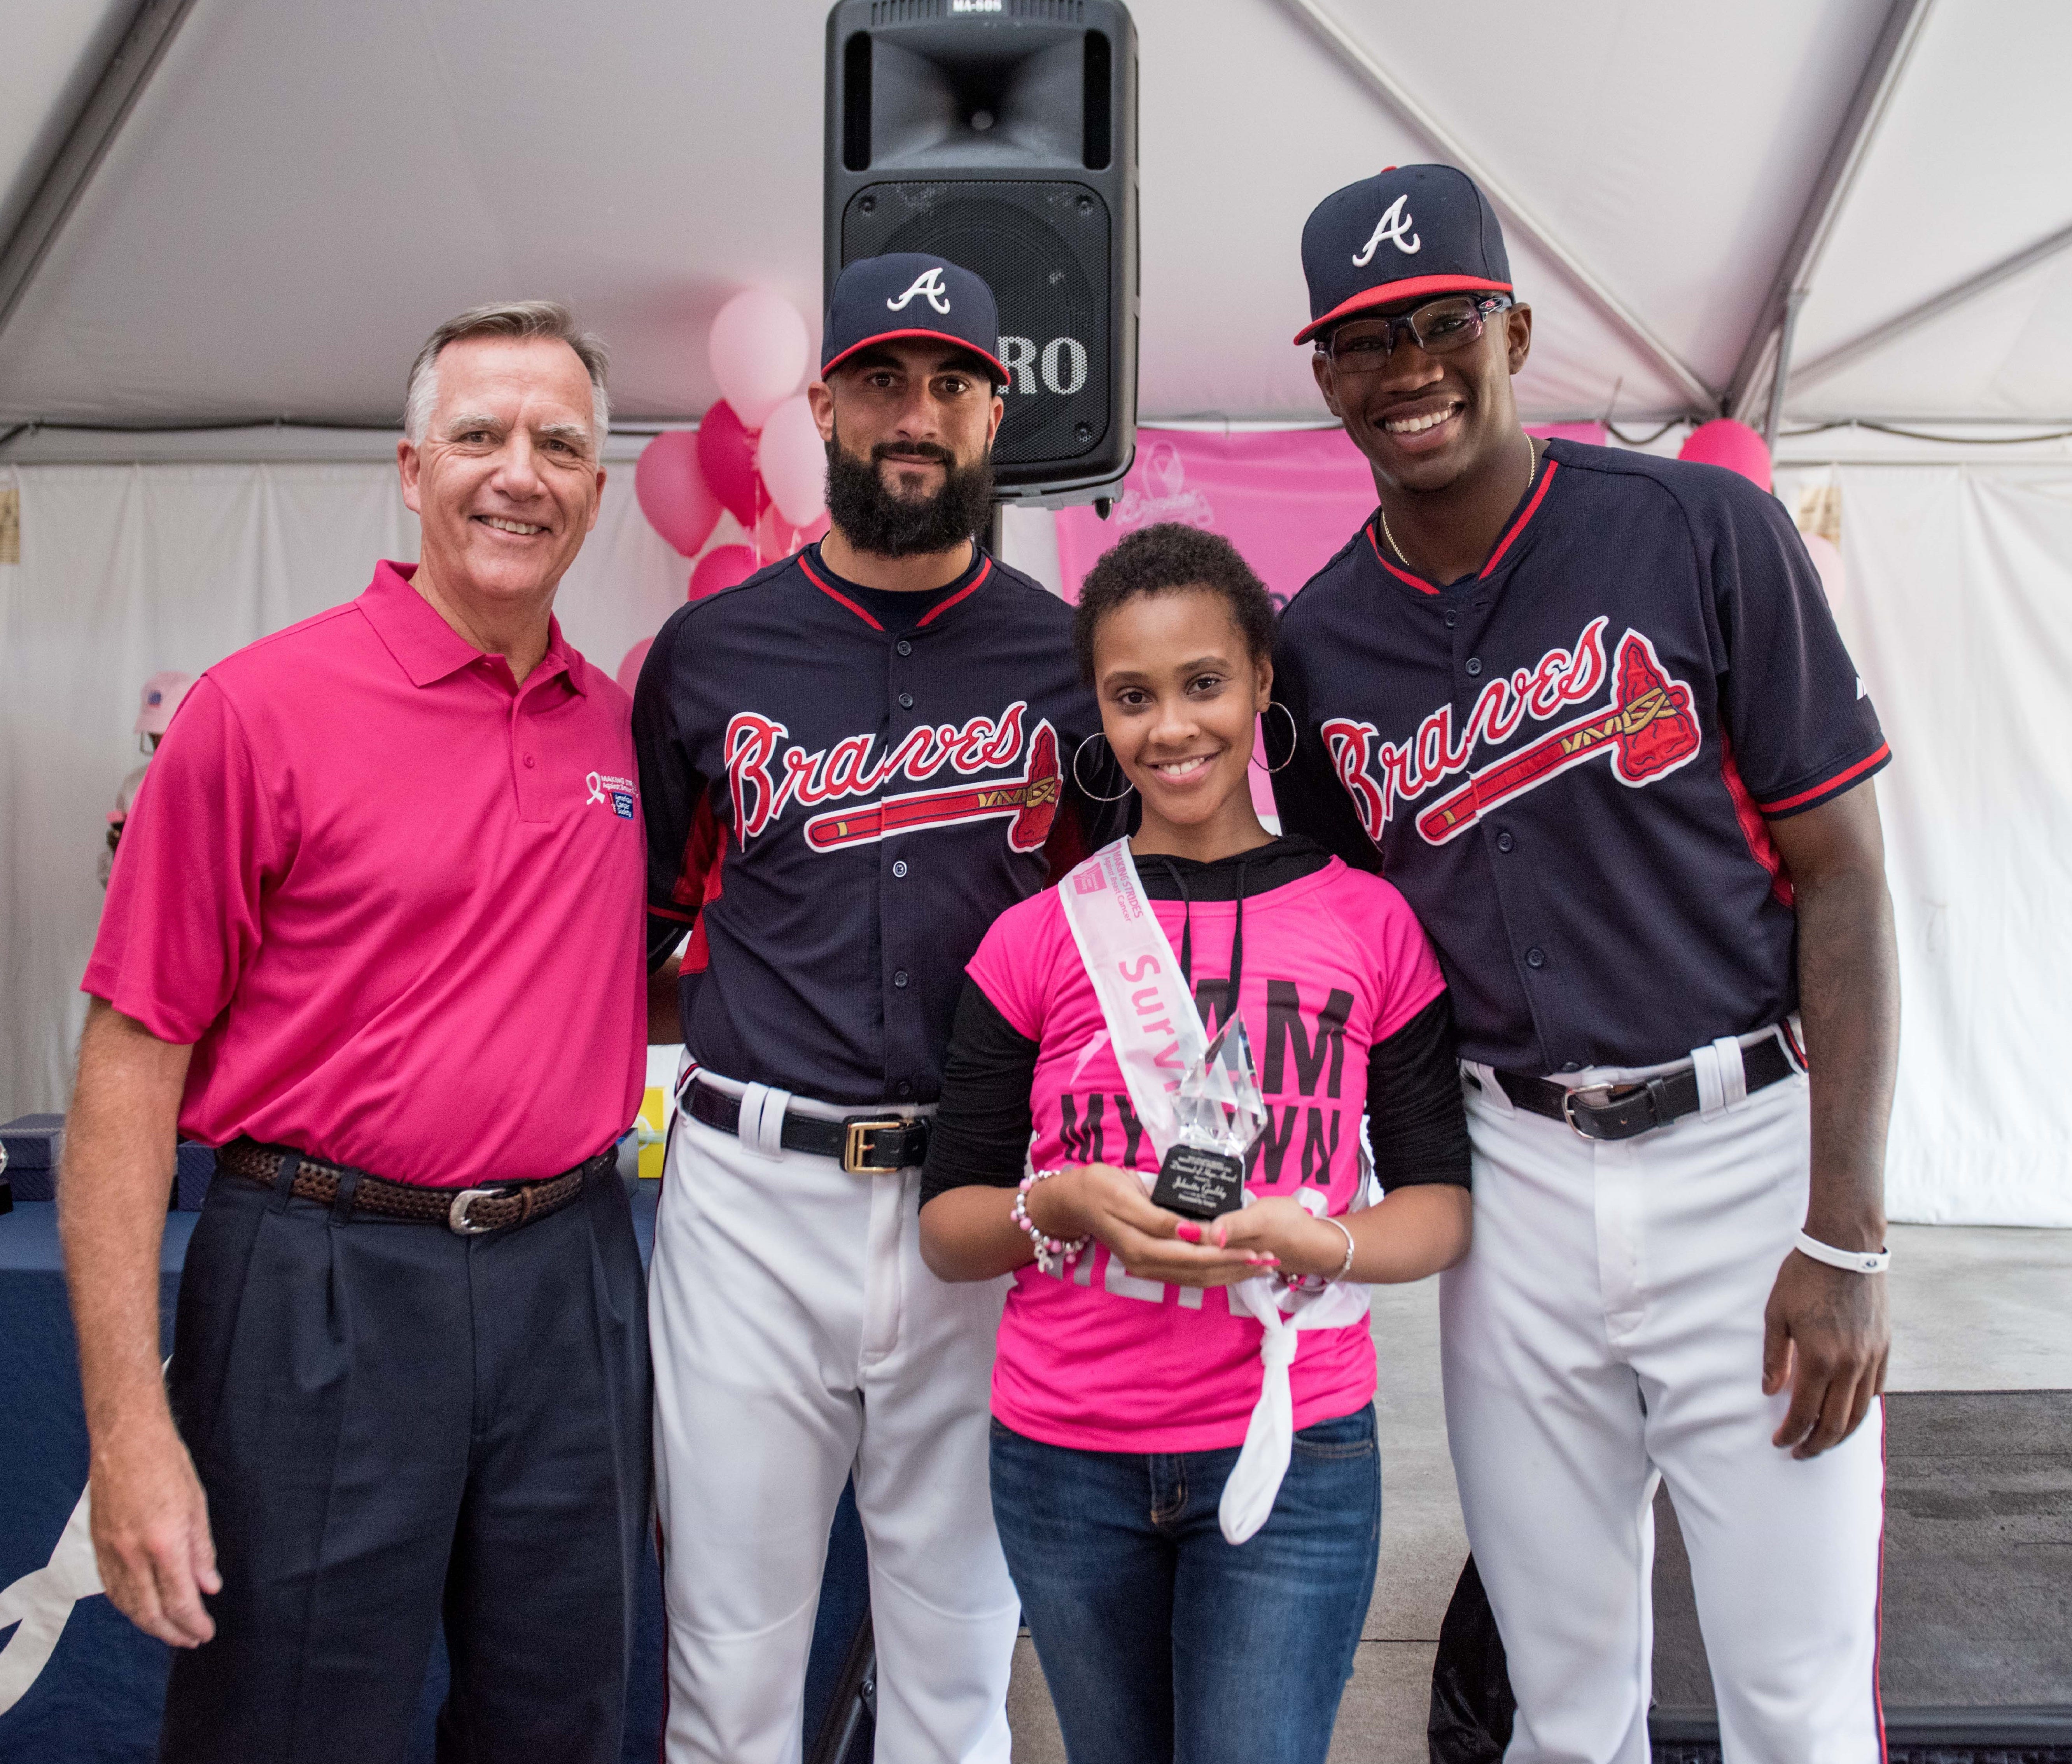 Braves and American Cancer Society Celebrate Breast Cancer